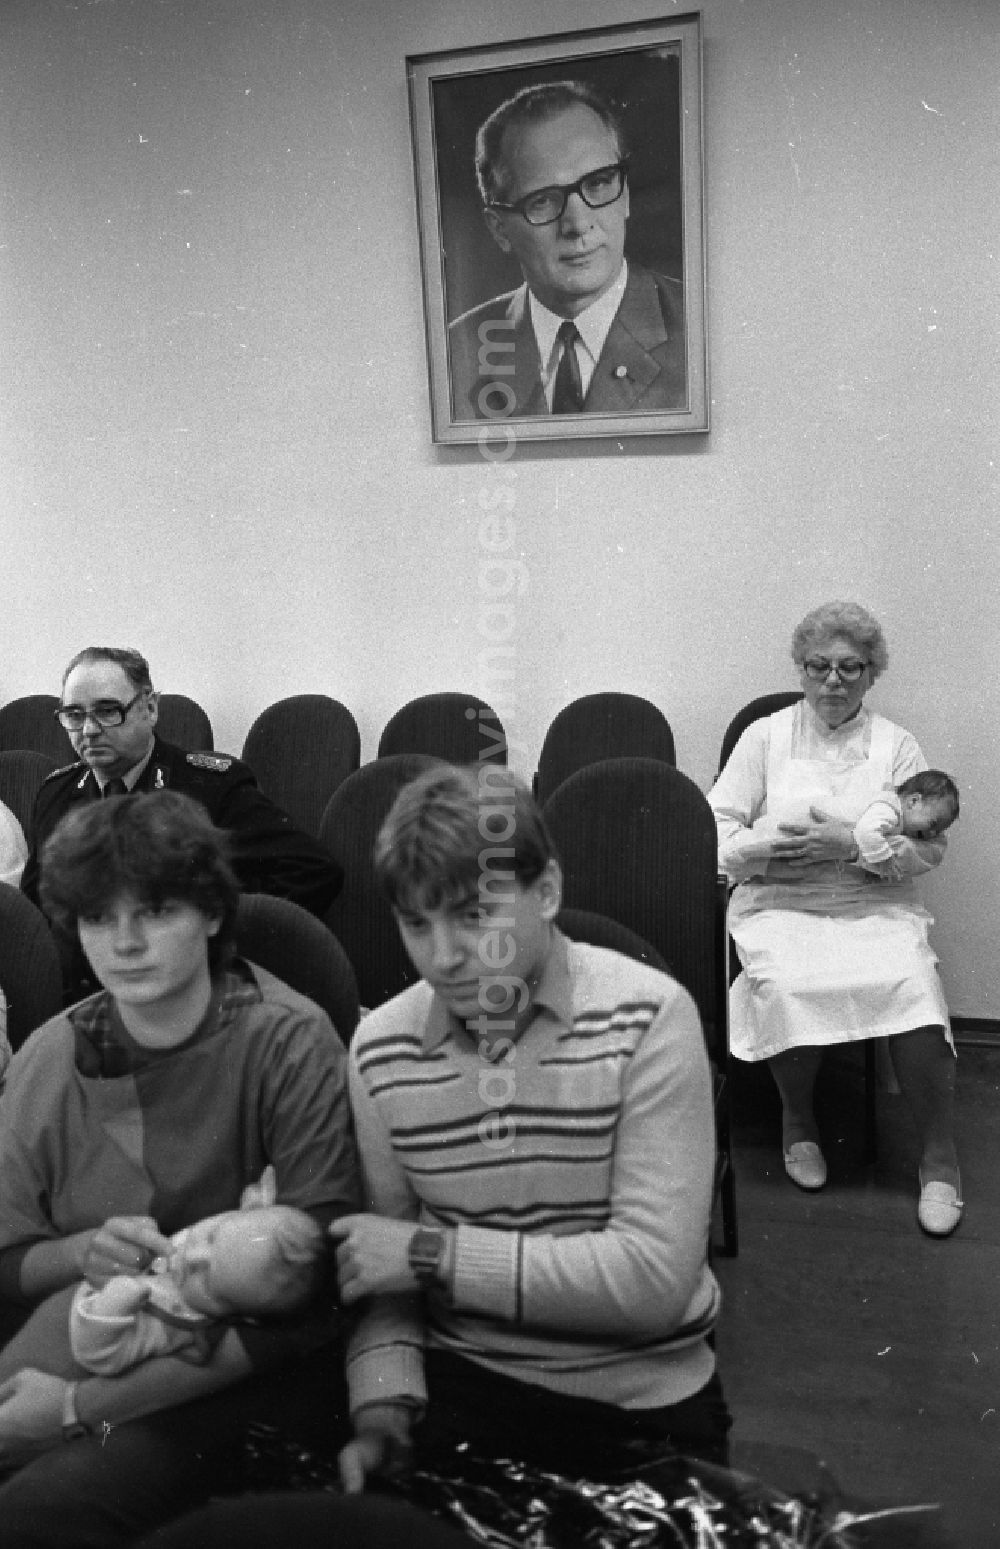 GDR photo archive: Magdeburg - Newborn toddlers in infancy in Magdeburg in the state Saxony-Anhalt on the territory of the former GDR, German Democratic Republic Offspring baby newborn child toddler welcome greeting the youngest citizen by the Mayor of Magdeburg